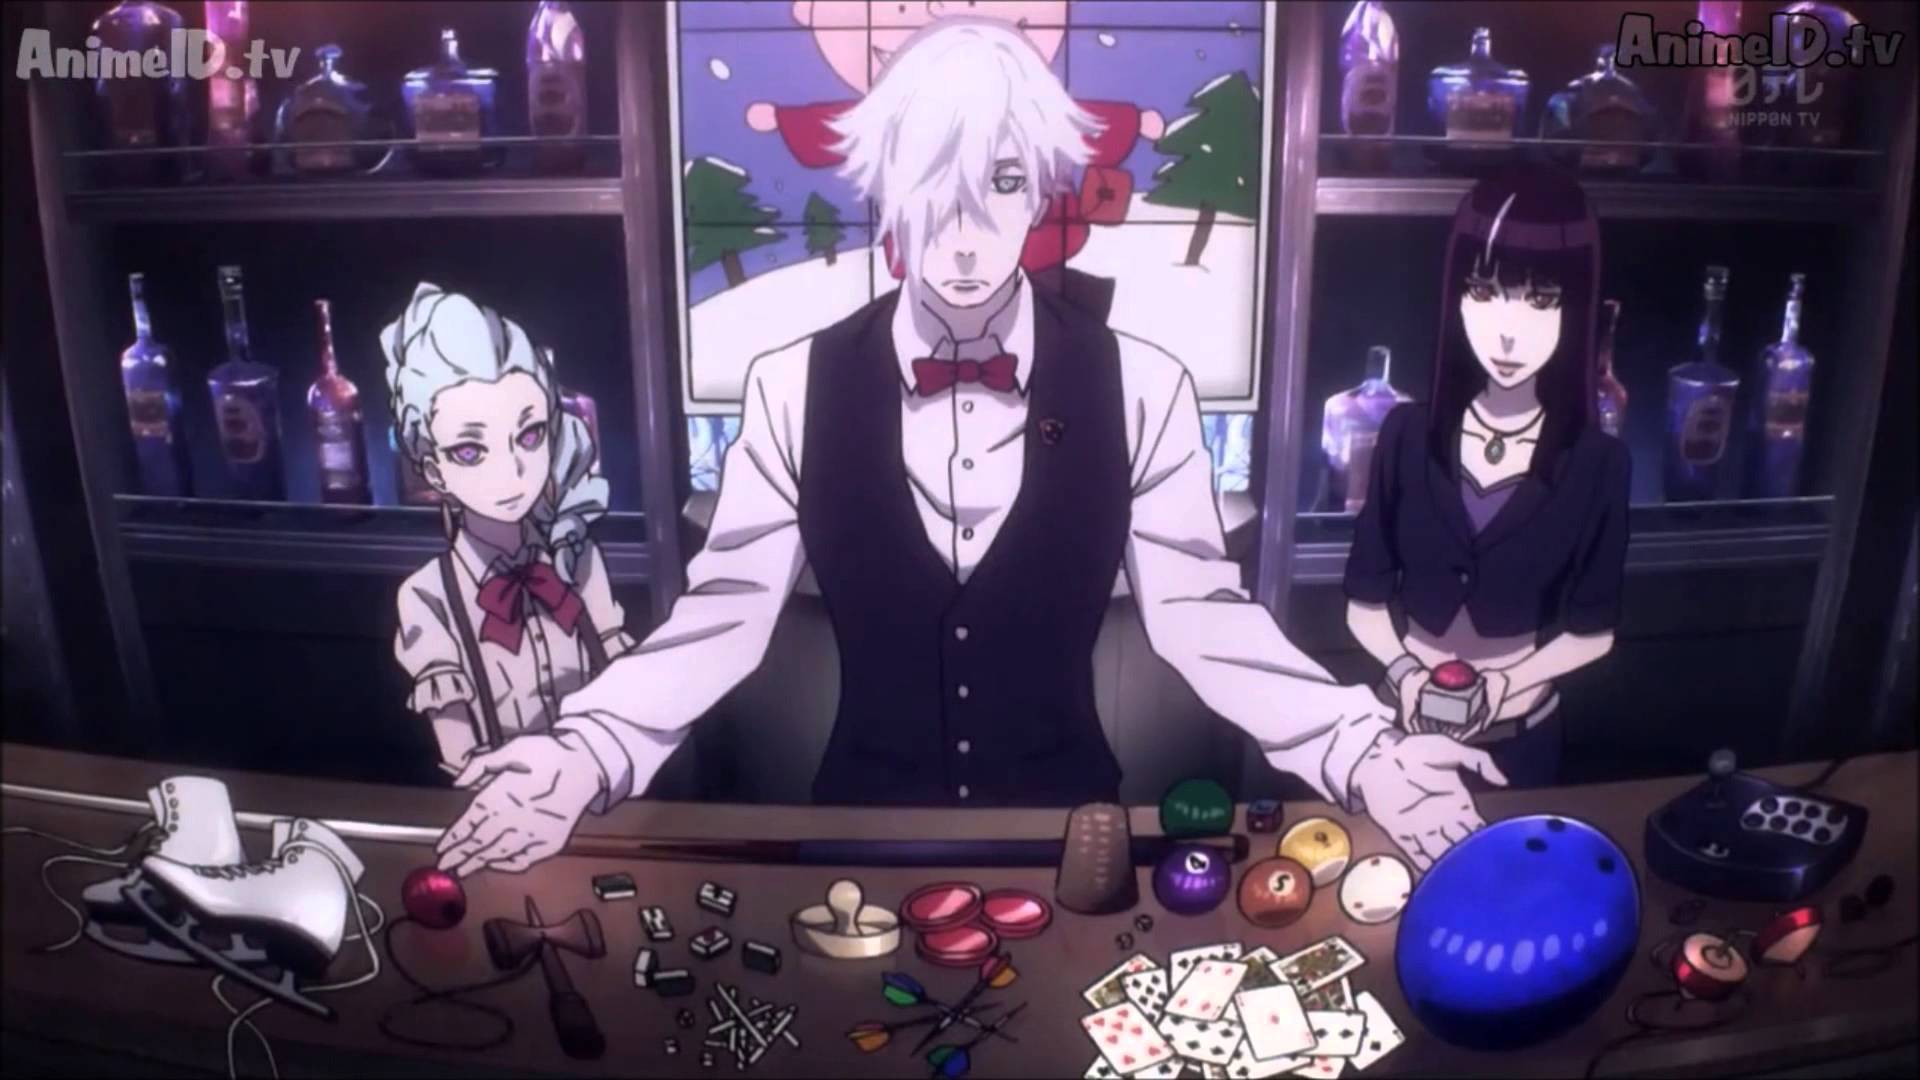 Beyond the Boundary Anime Character Death Parade, Anime